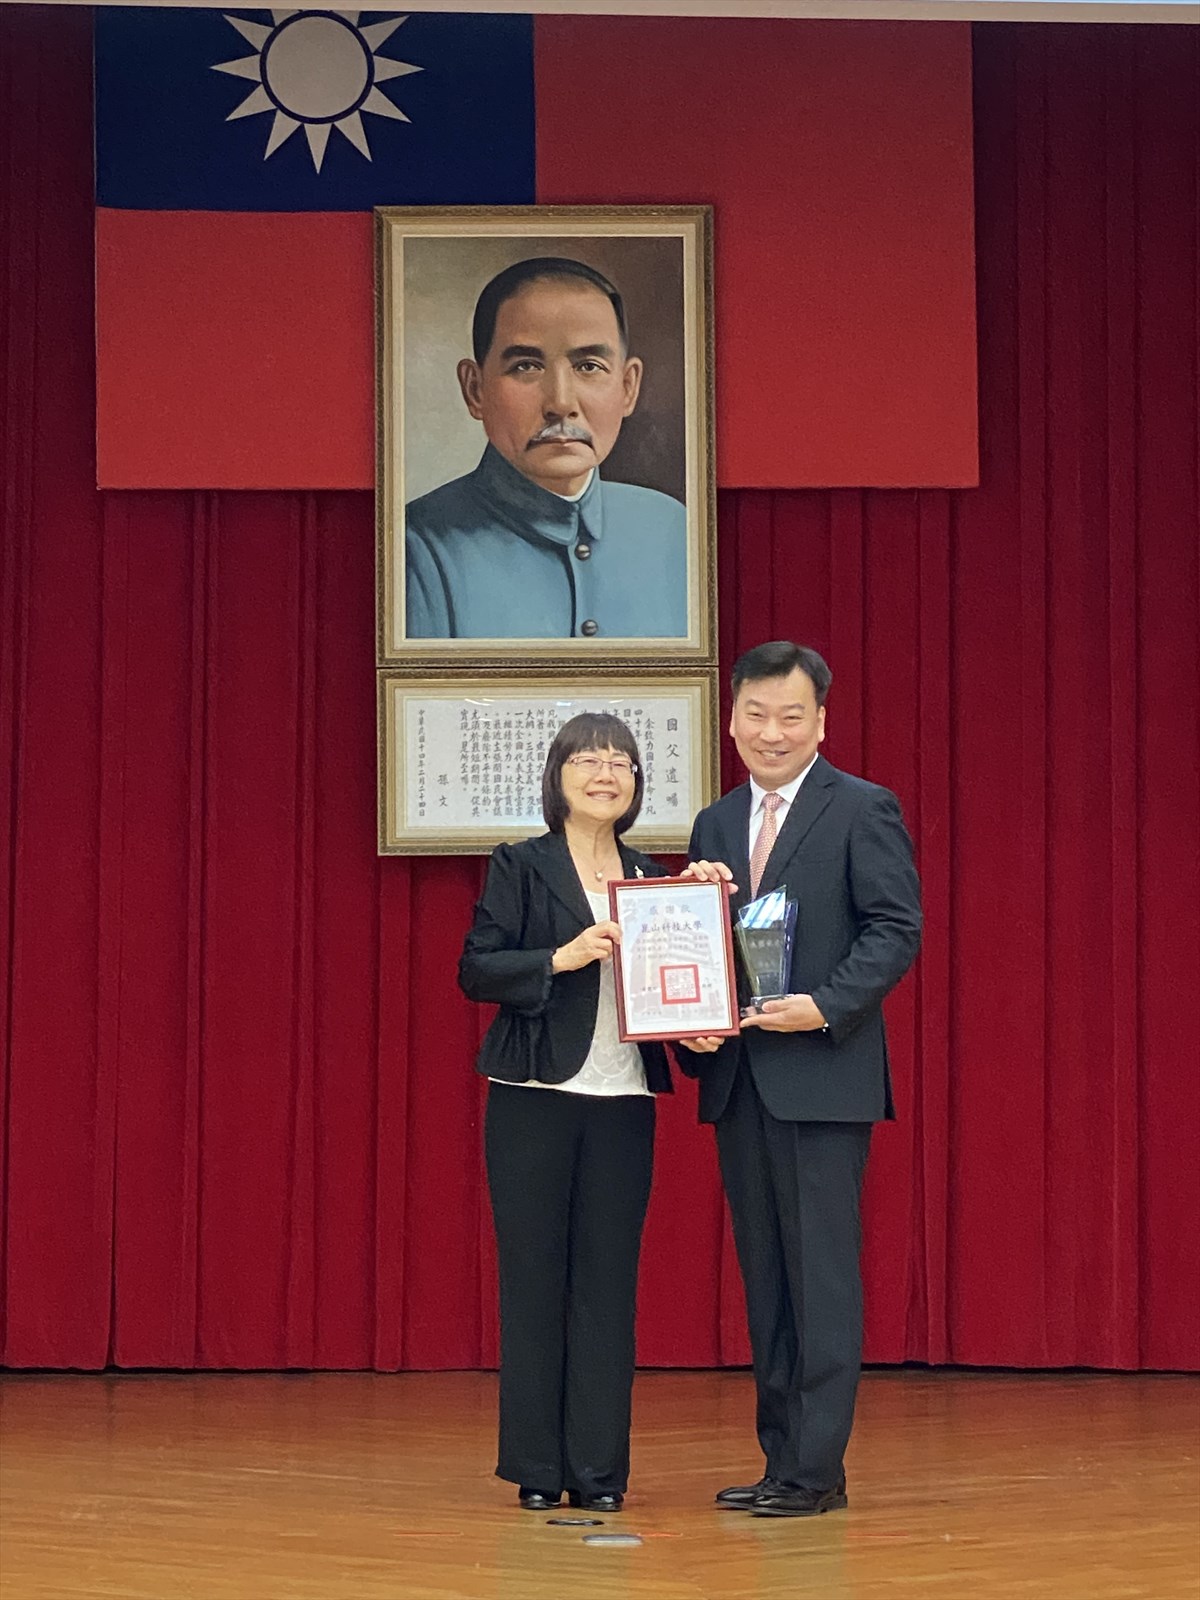 03.KSU Conducts National Examination Services for Over 10 Years: President Lee Tien-Shiang Awarded Third-Class Medal for Supervisory Dedication